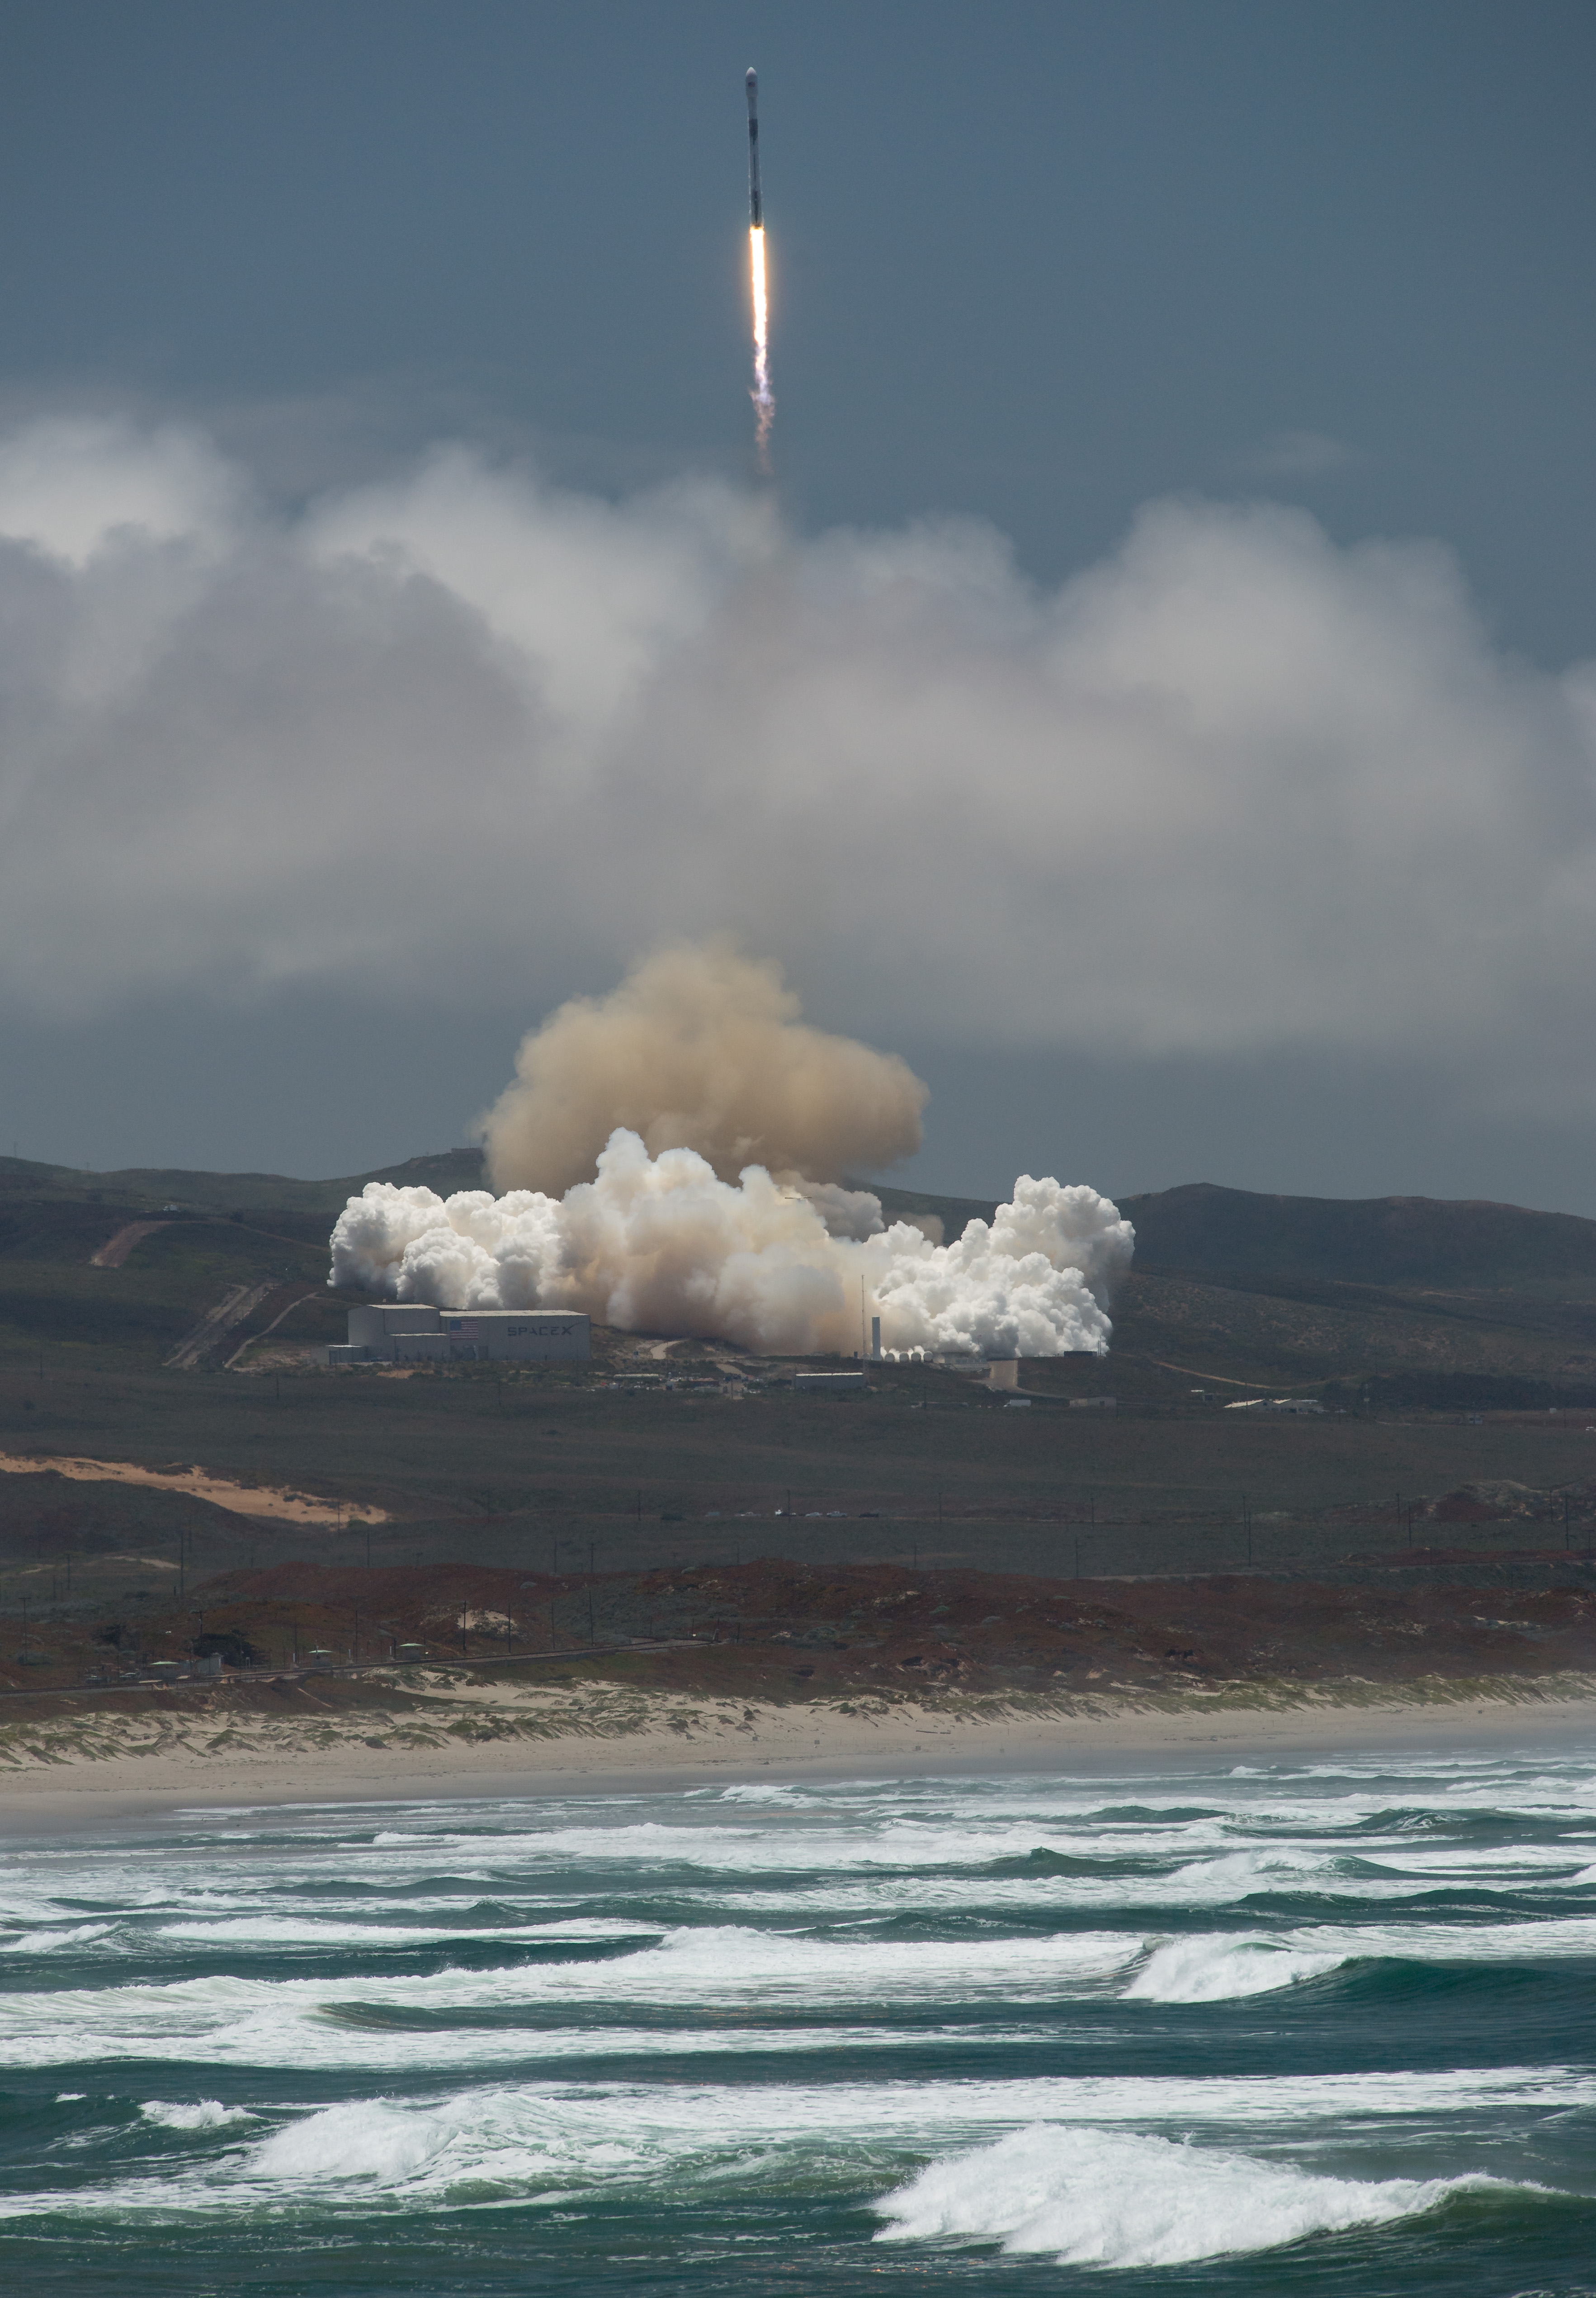 The rocket carrying GRACE-FO blasts off from the launch pad, with the ocean in the foreground.